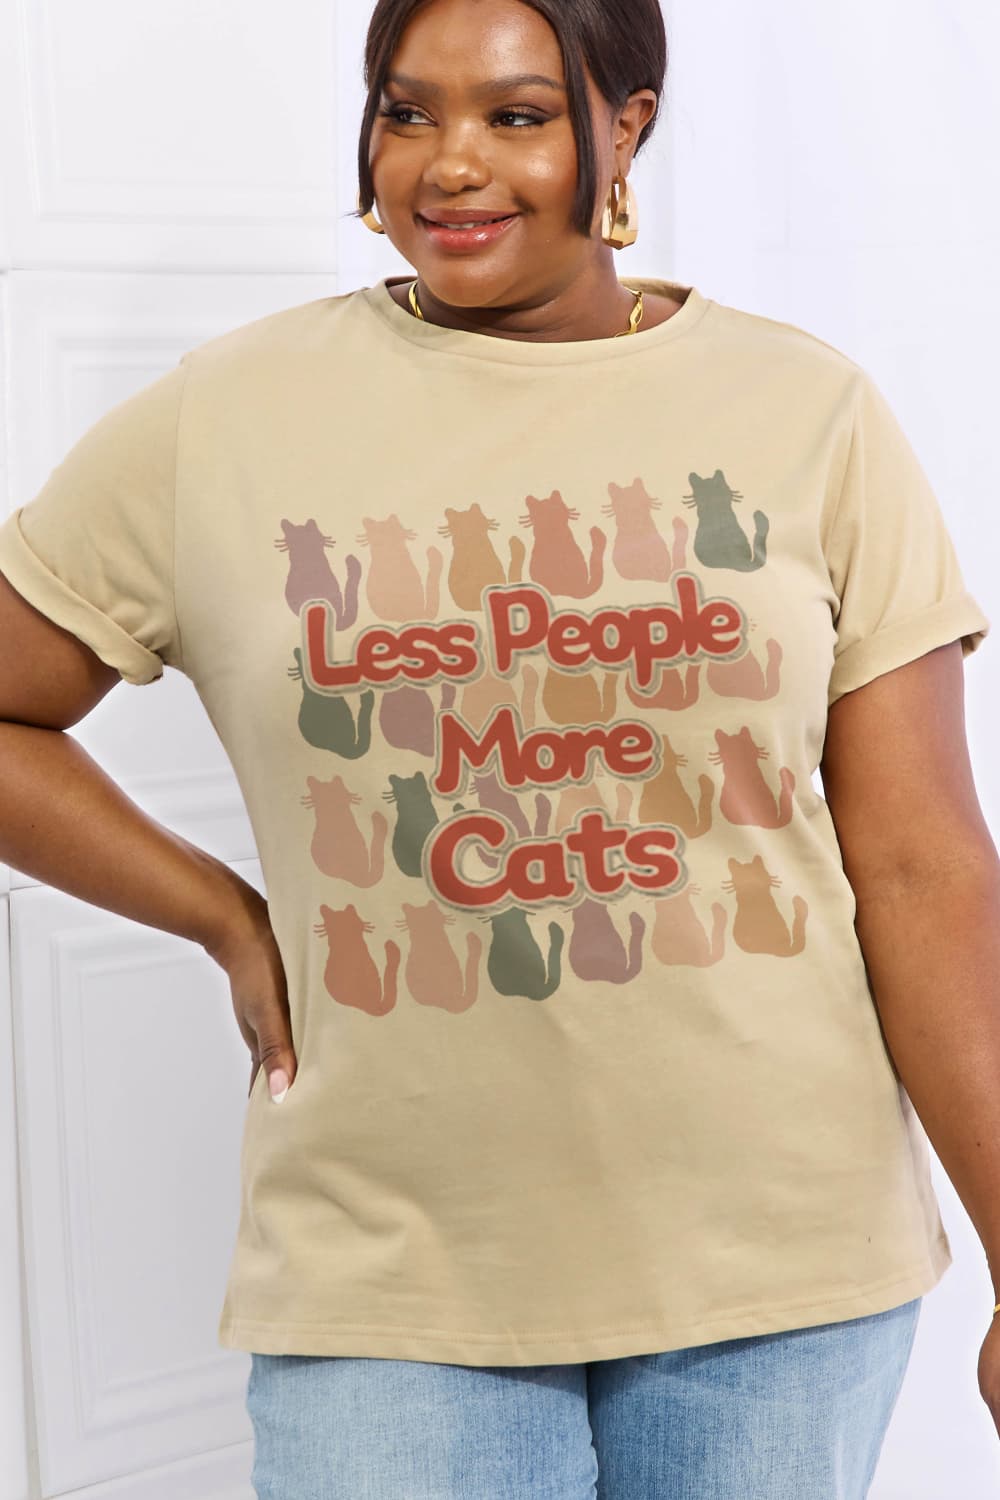 LESS PEOPLE MORE CATS Graphic Cotton Tee - T-Shirts - Shirts & Tops - 10 - 2024